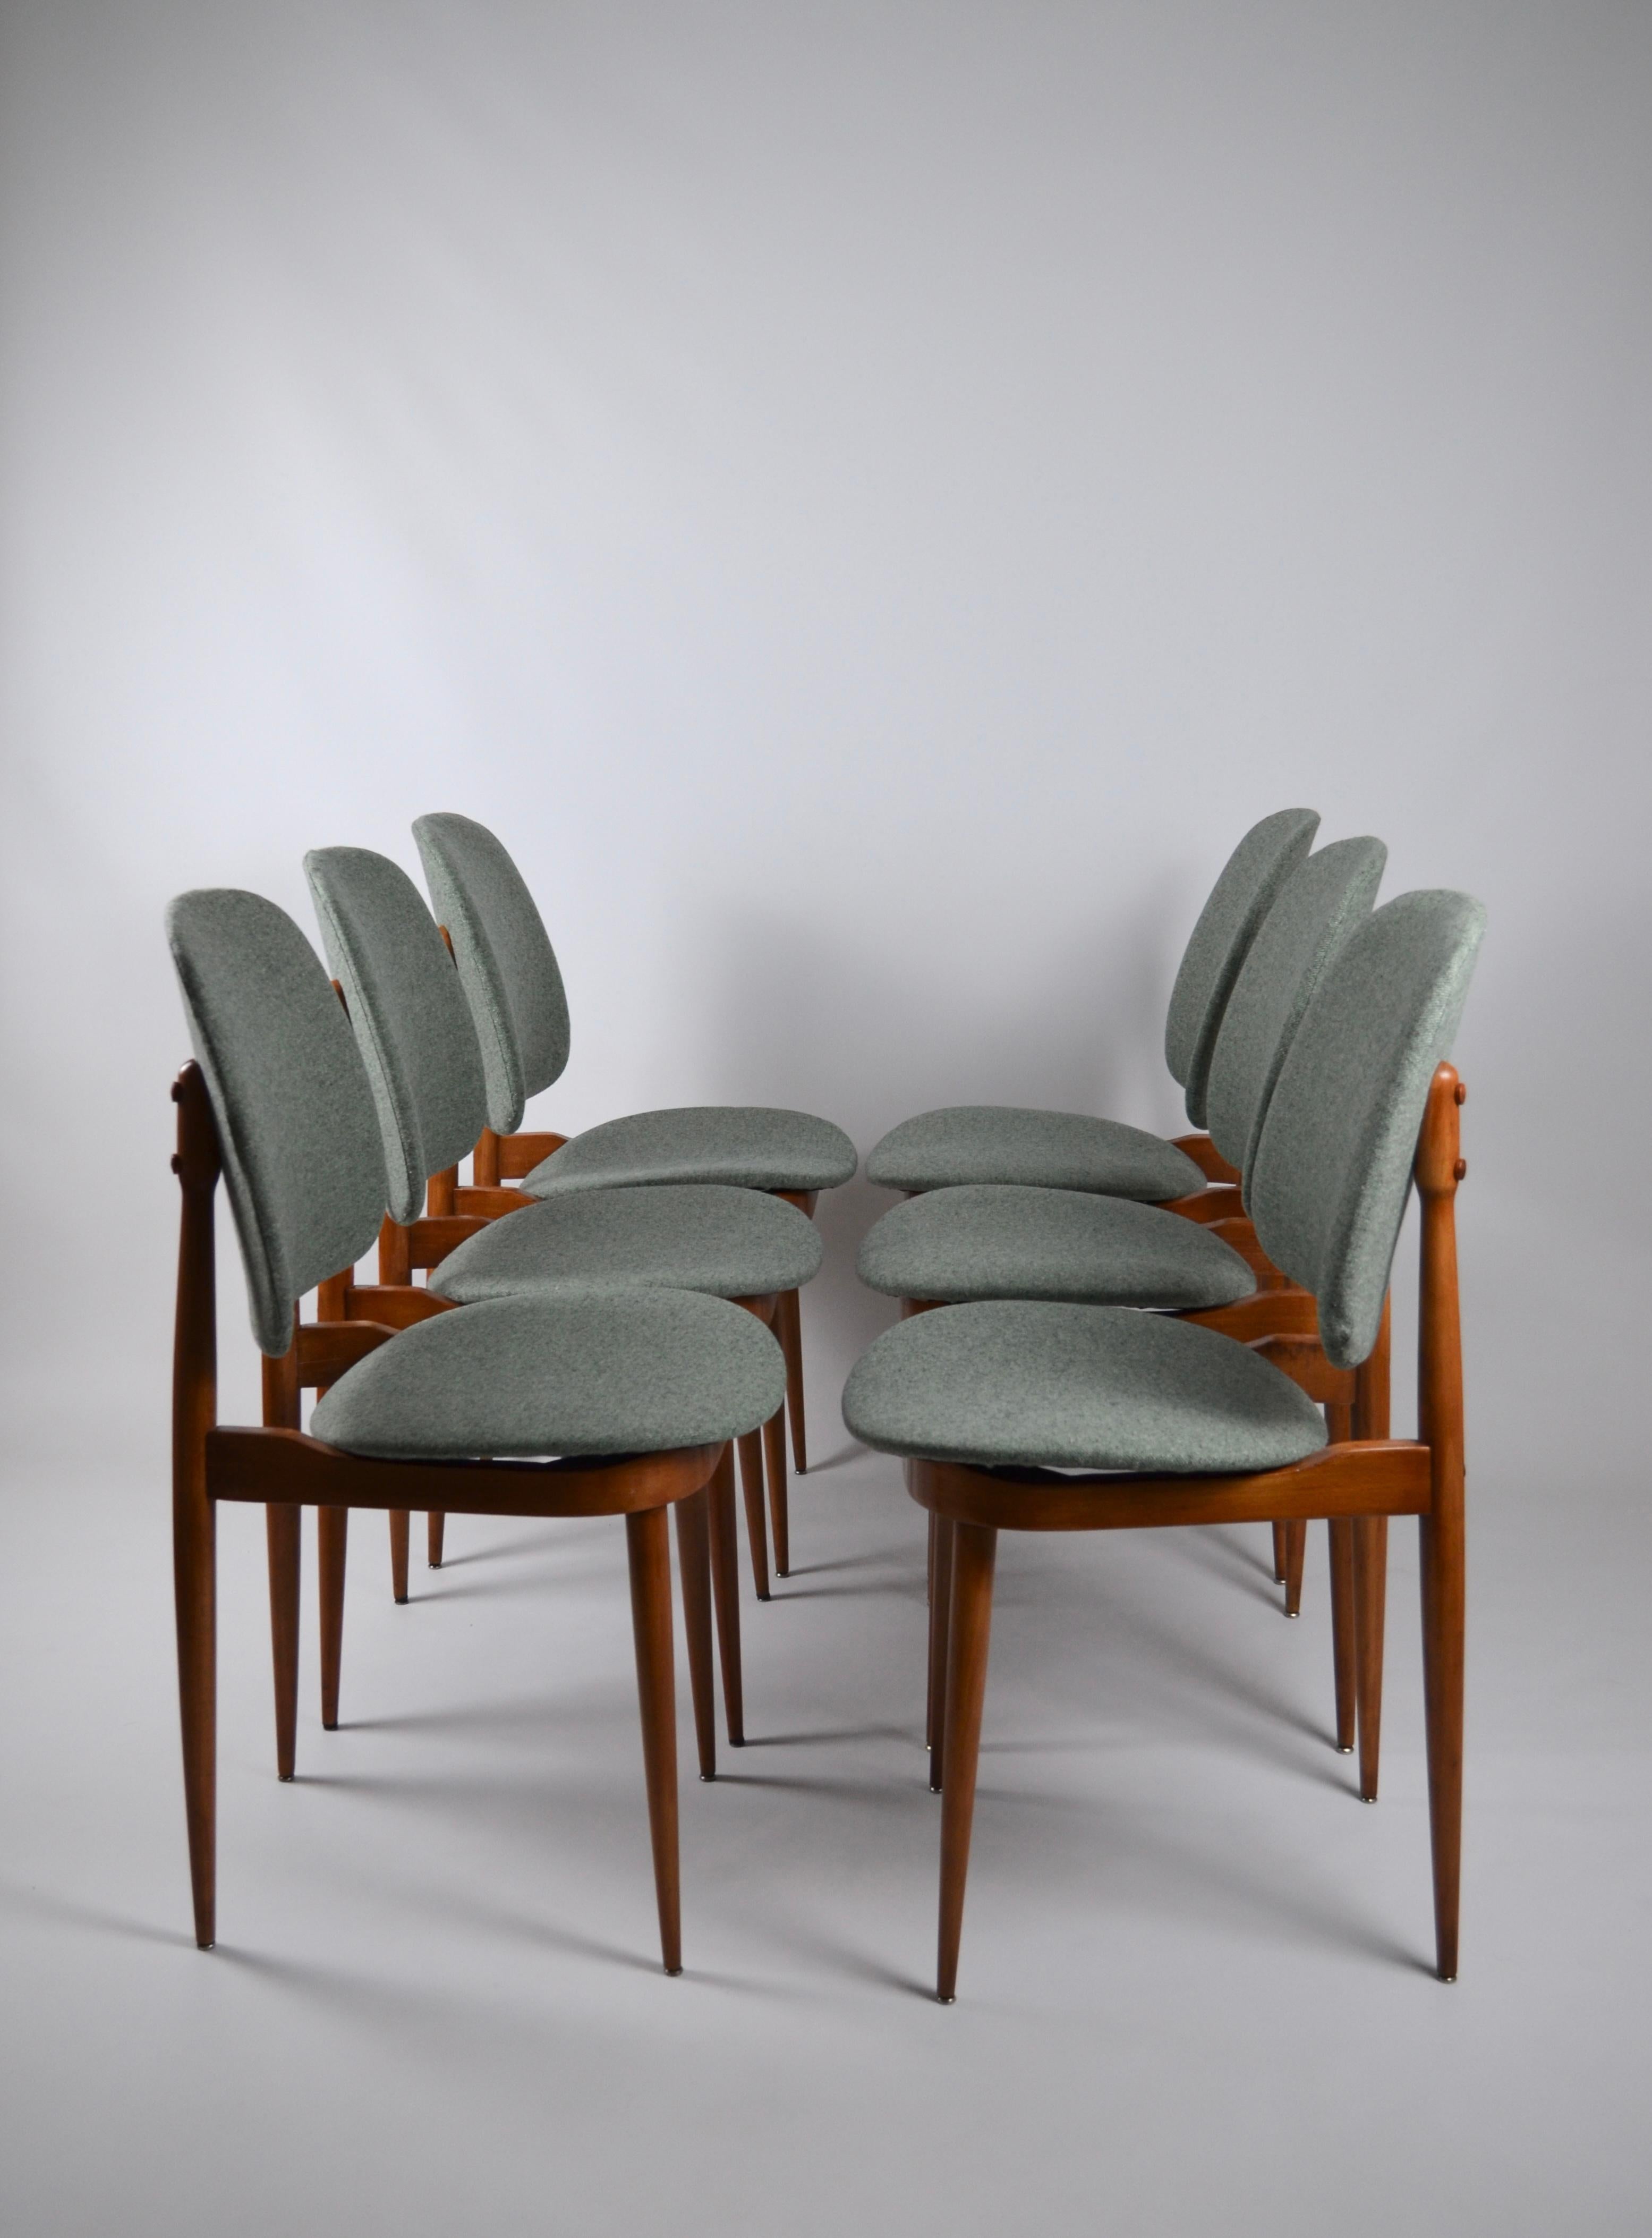 French Set of 6 Pegase Chairs, by Pierre Guariche for Baumann, France, 60s